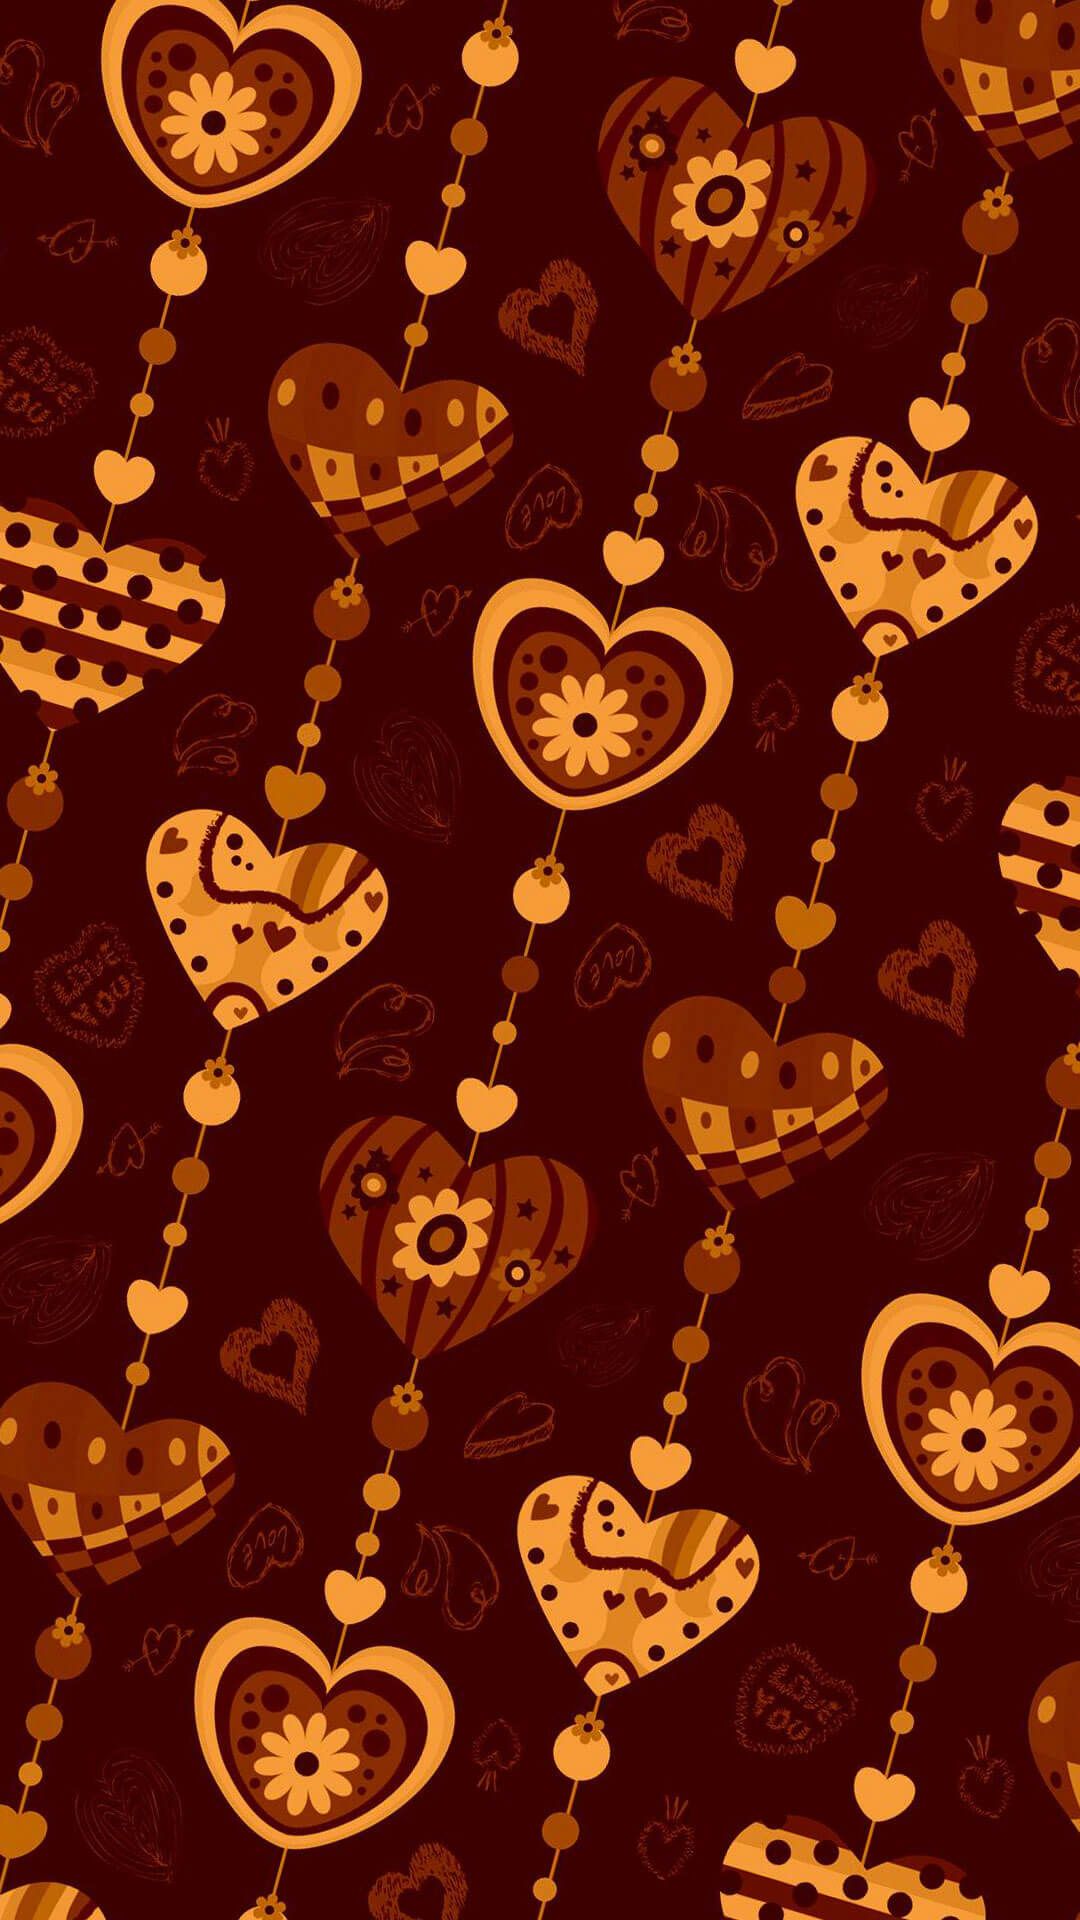 A girly heart pattern (chocolate brown). iPhone Wallpaper. Chocolate brown colour, Heart patterns, Heart wallpaper